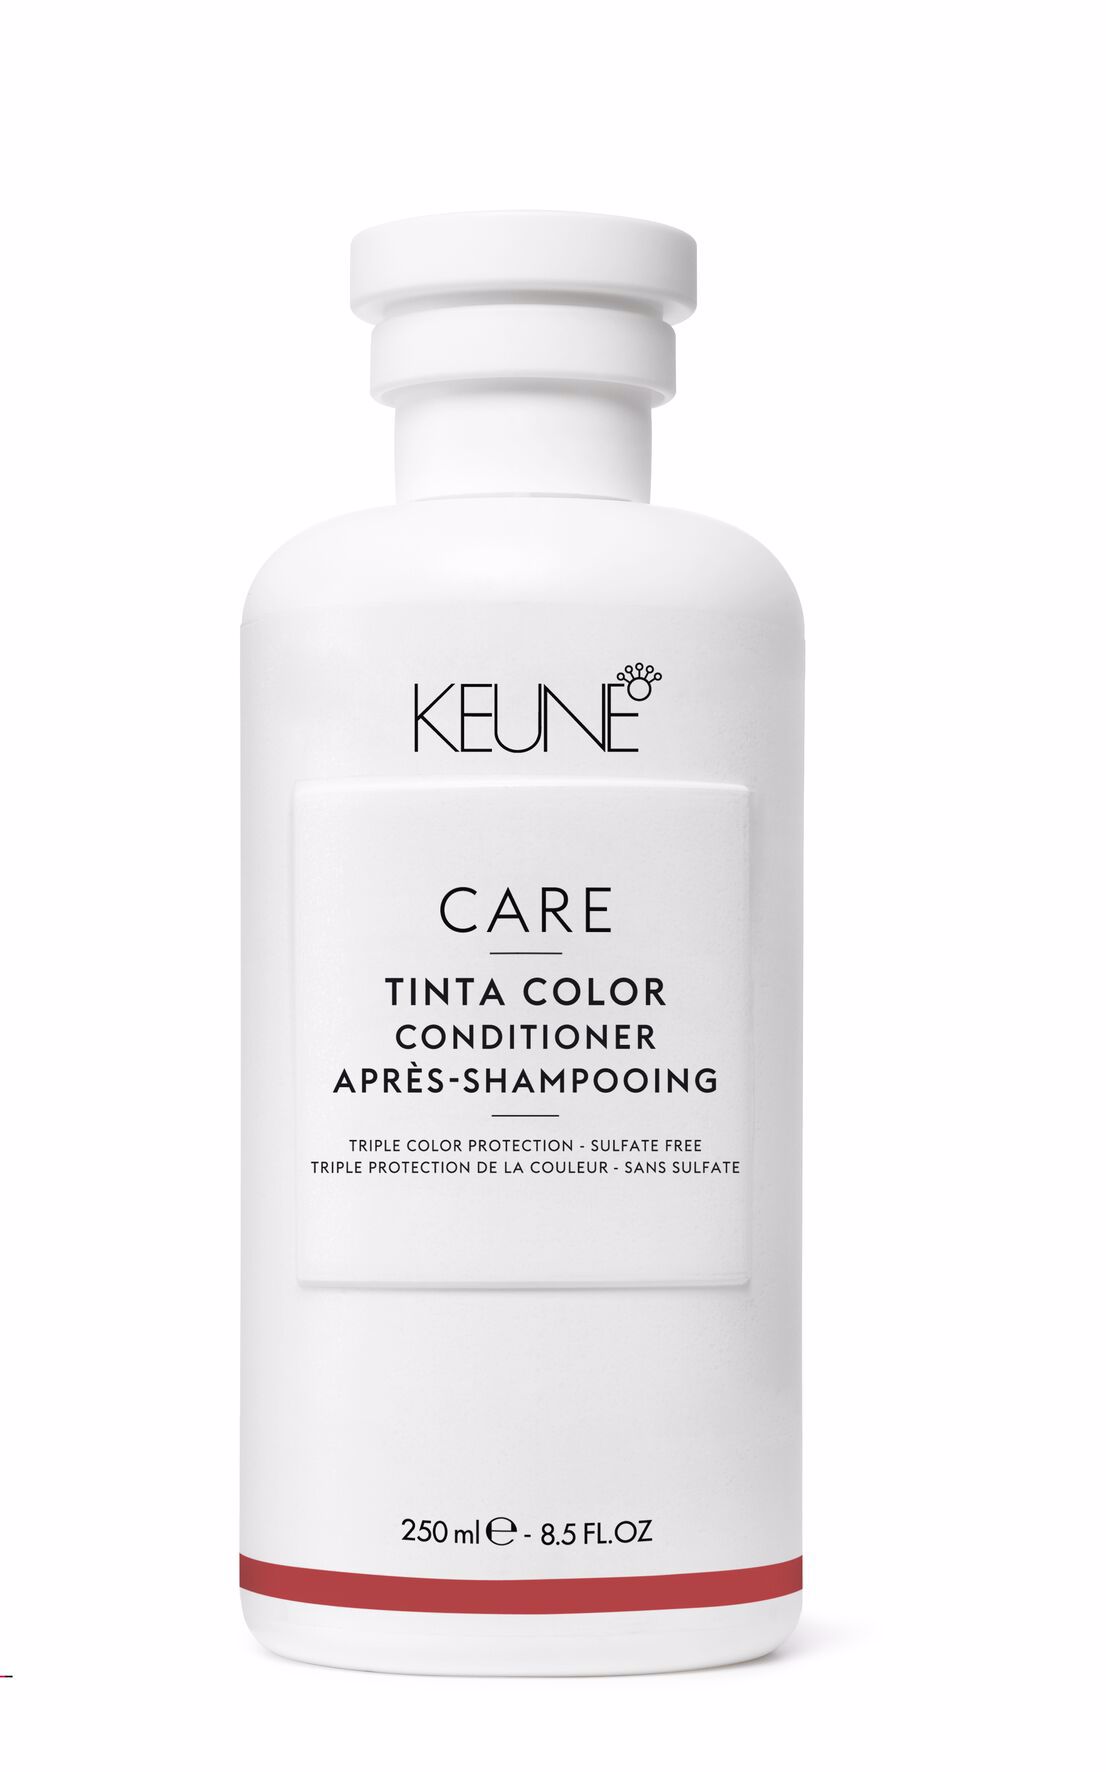 Care Tinta Color Conditioner is a hair care product that revitalizes and nourishes thedyed  hair, prevents color fading, and provides long-lasting color brilliance. It is gluten-free. On keune.ch.